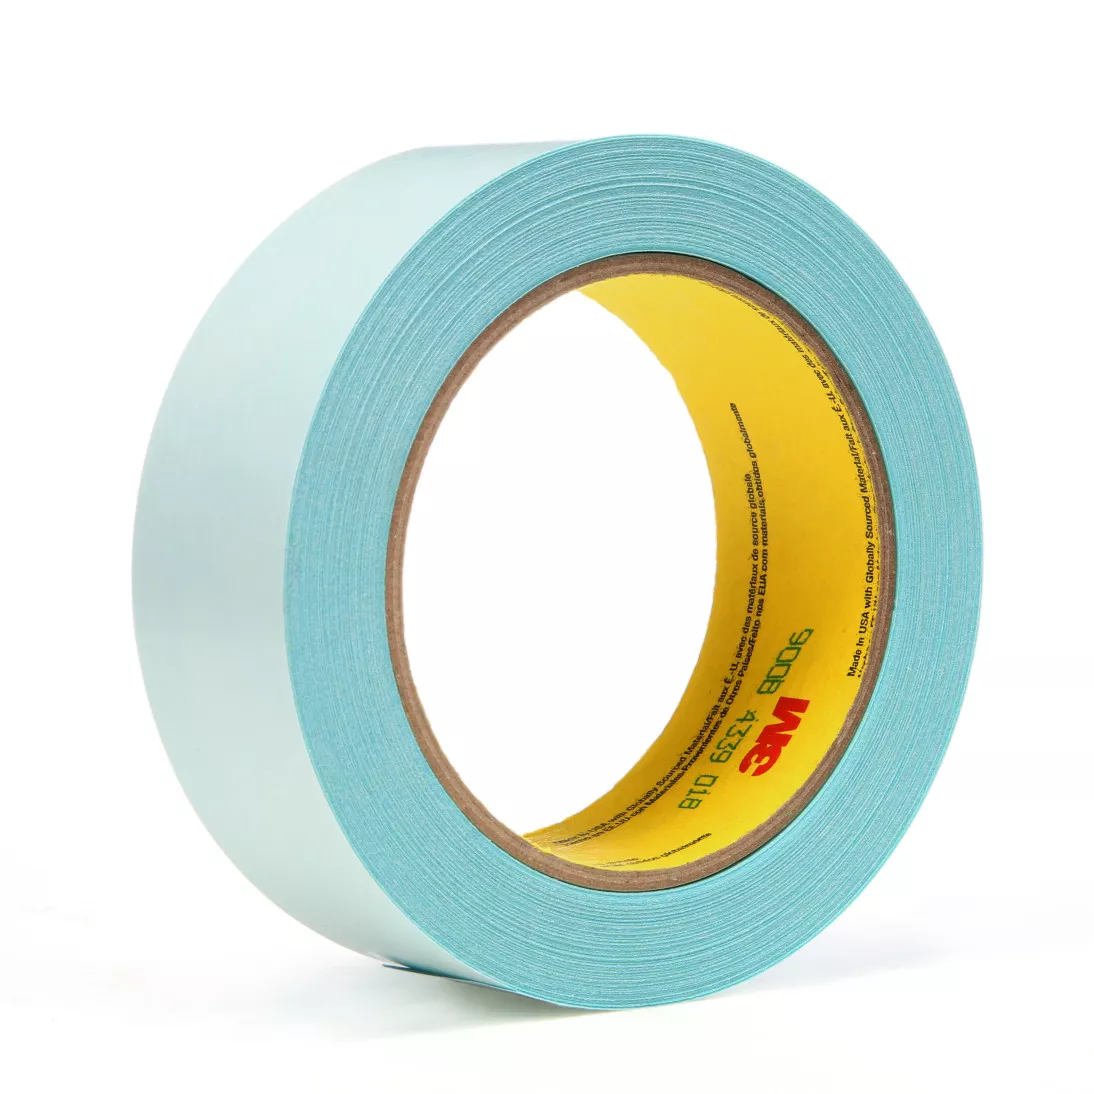 3M™ Repulpable Double Coated Splicing Tape 900, 48 mm x 33 m, 2.5 mil,
24 rolls per case